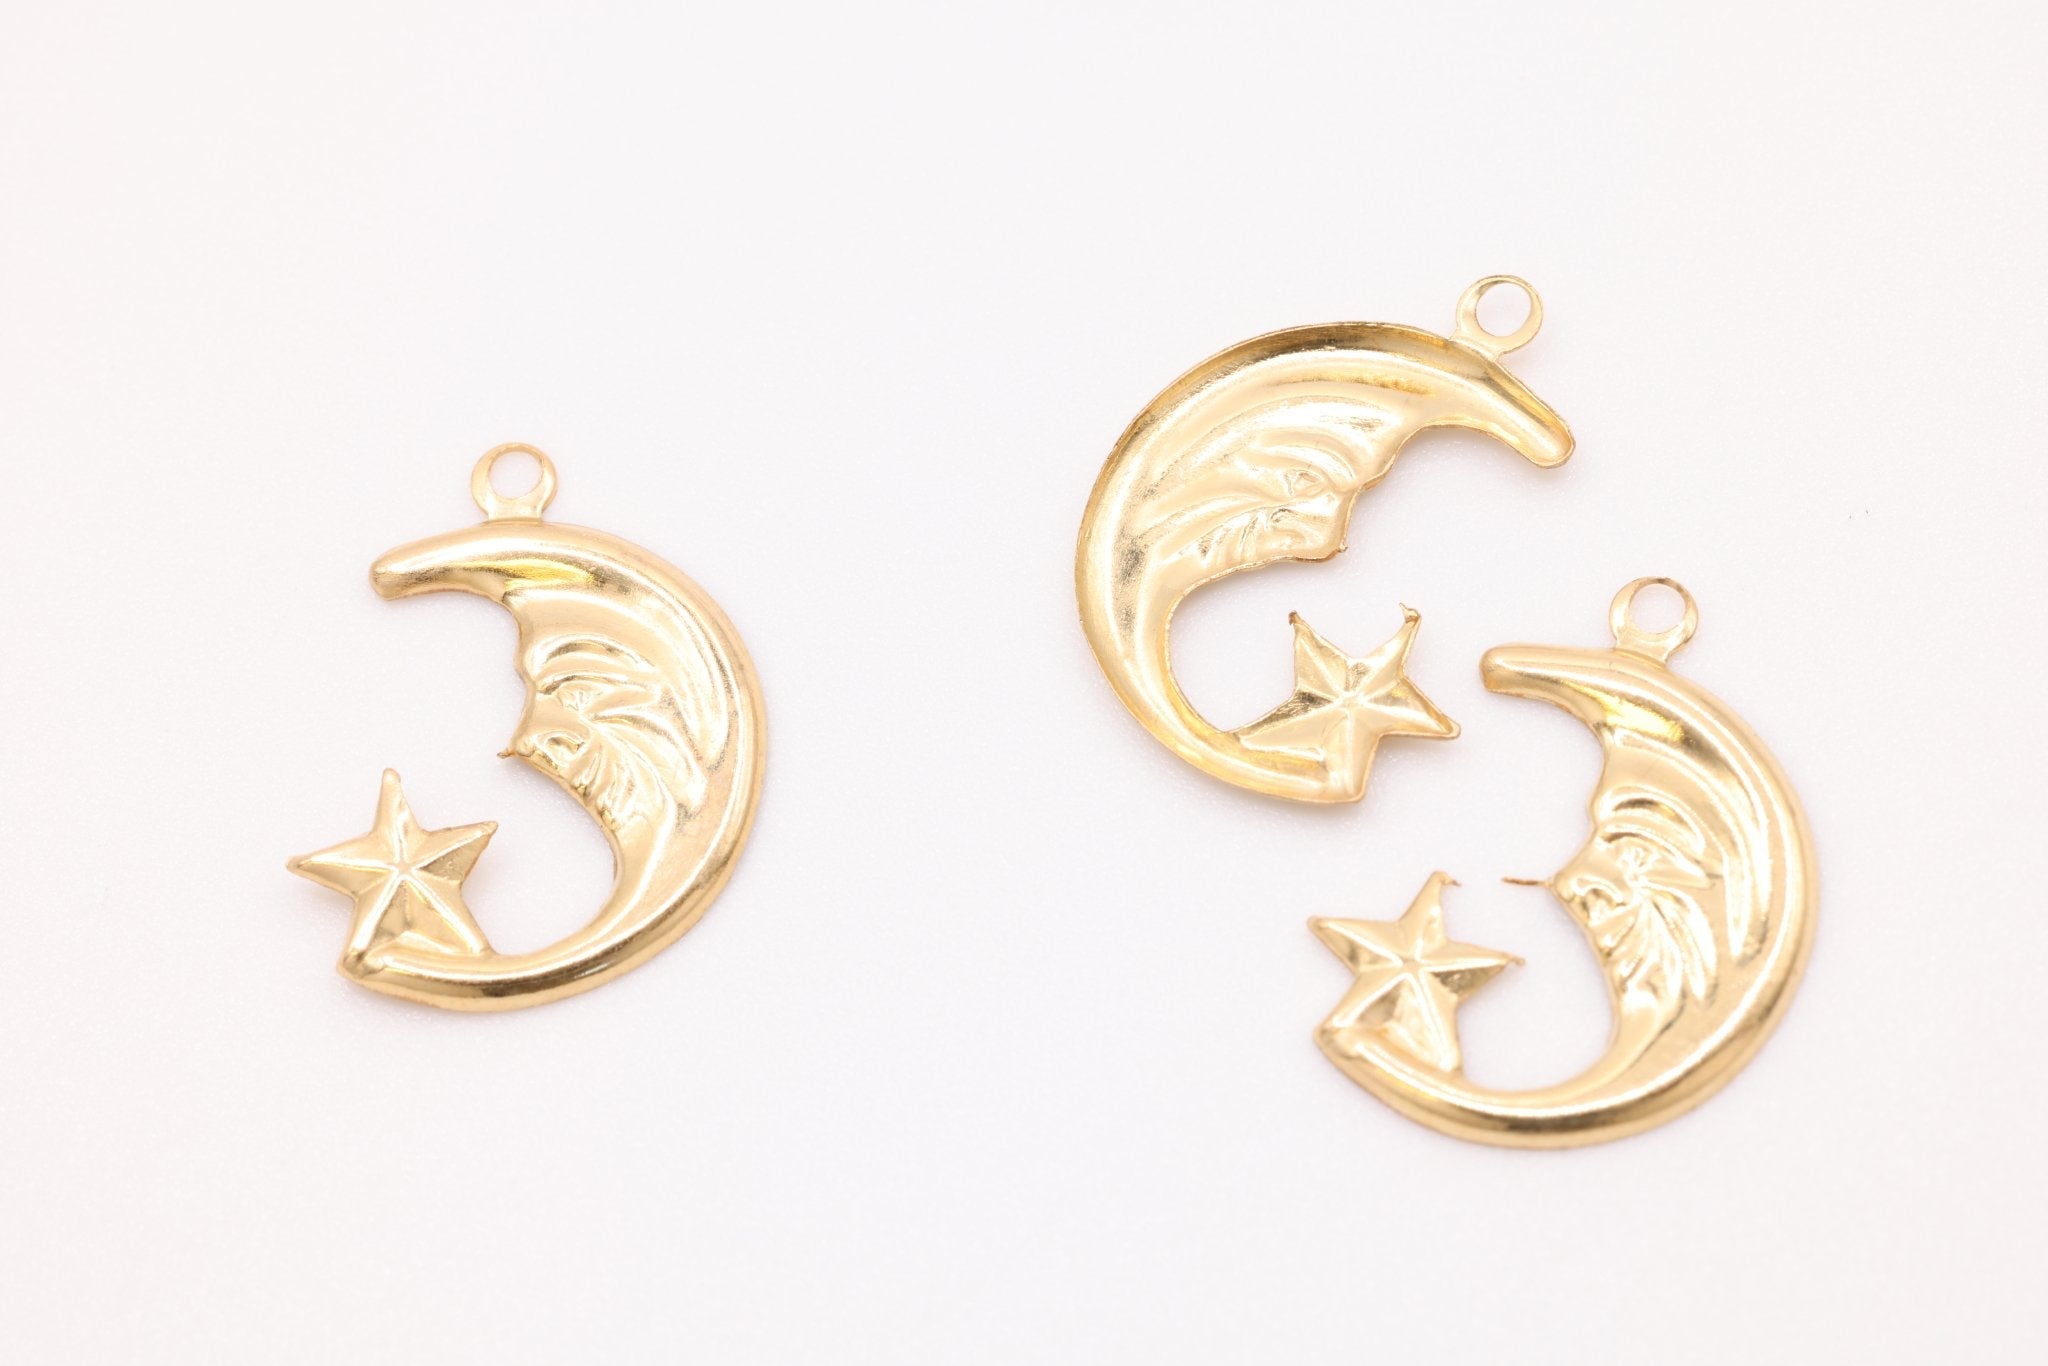 14K Gold-Filled Moon Face Charm, Celestial Crescent Moon Star, Jewelry Making Charm - HarperCrown